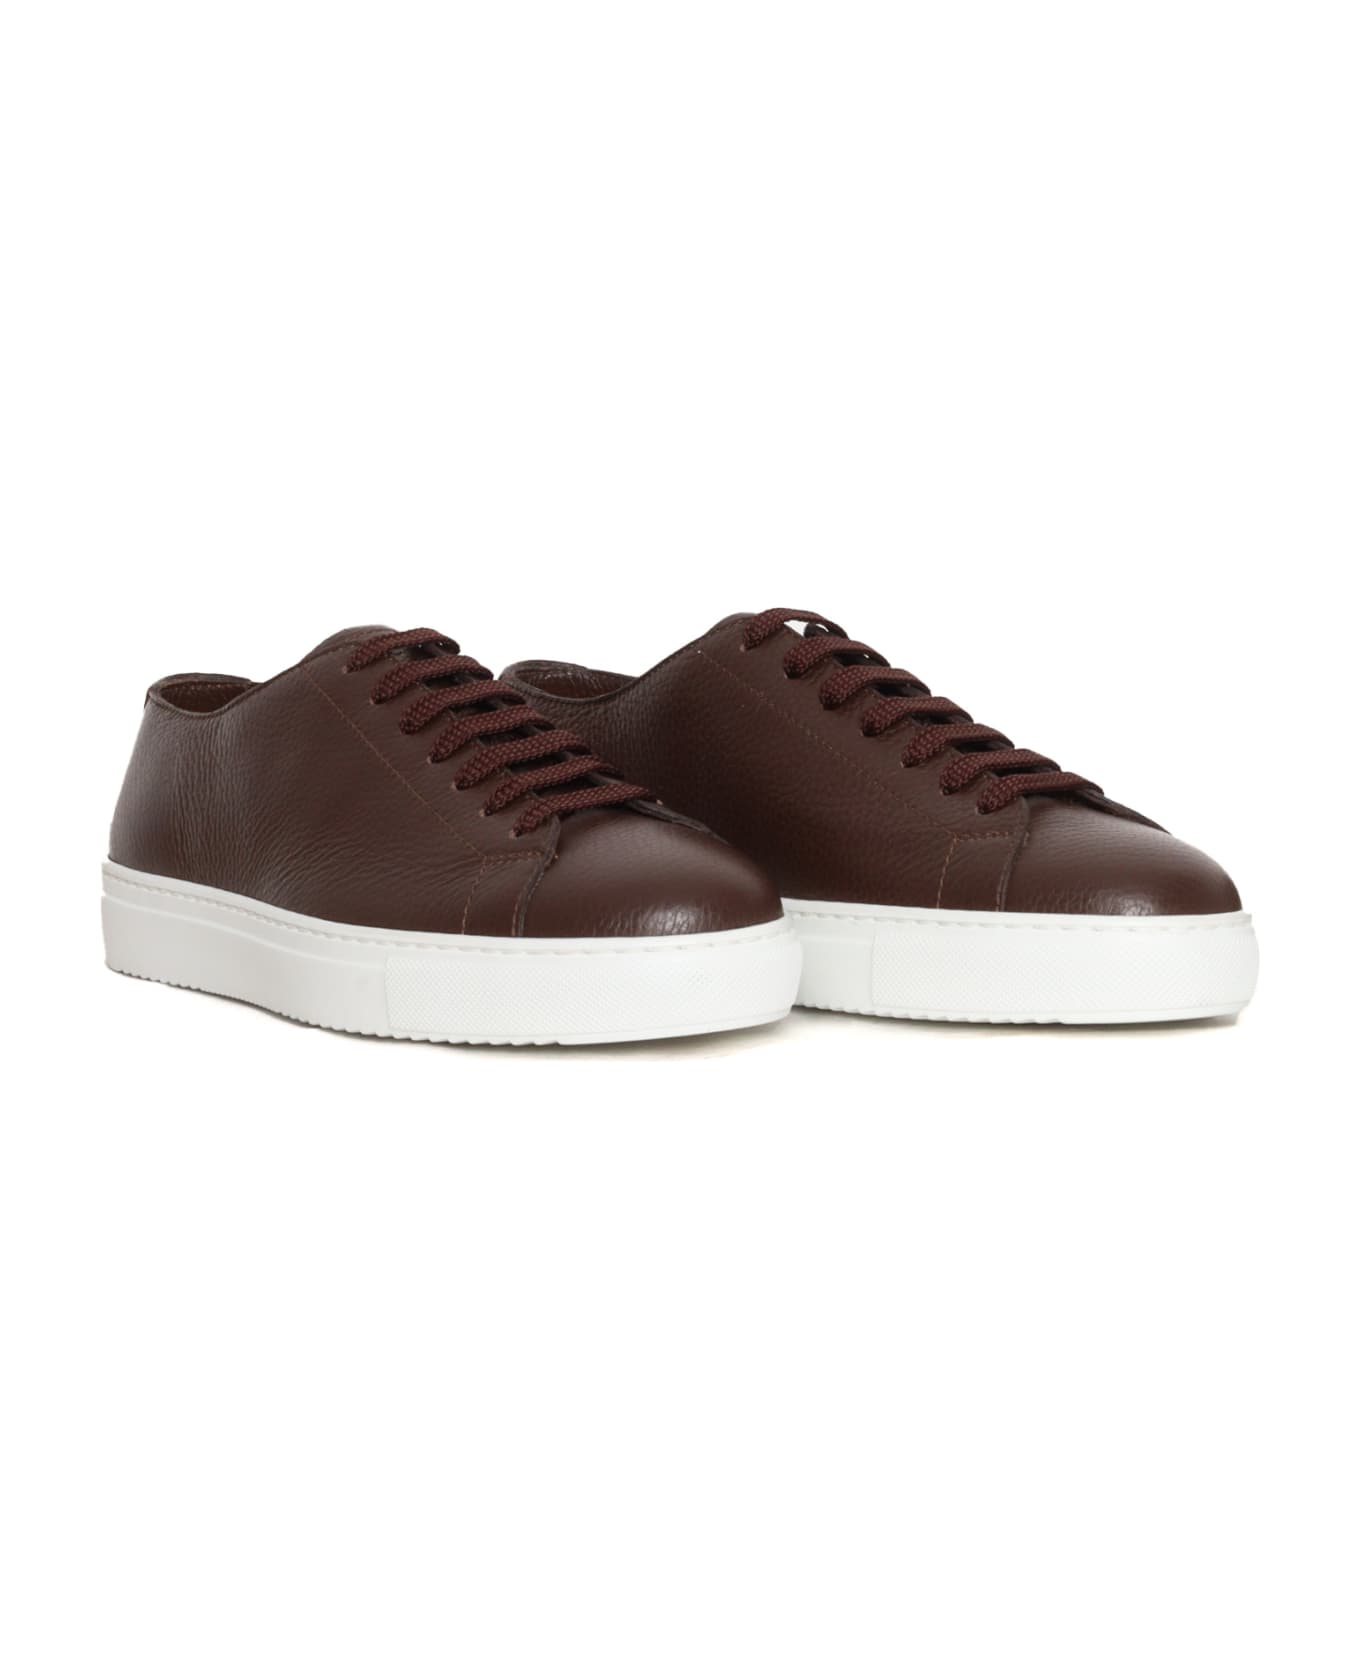 Doucal's Brown Leather Sneakers - BROWN スニーカー